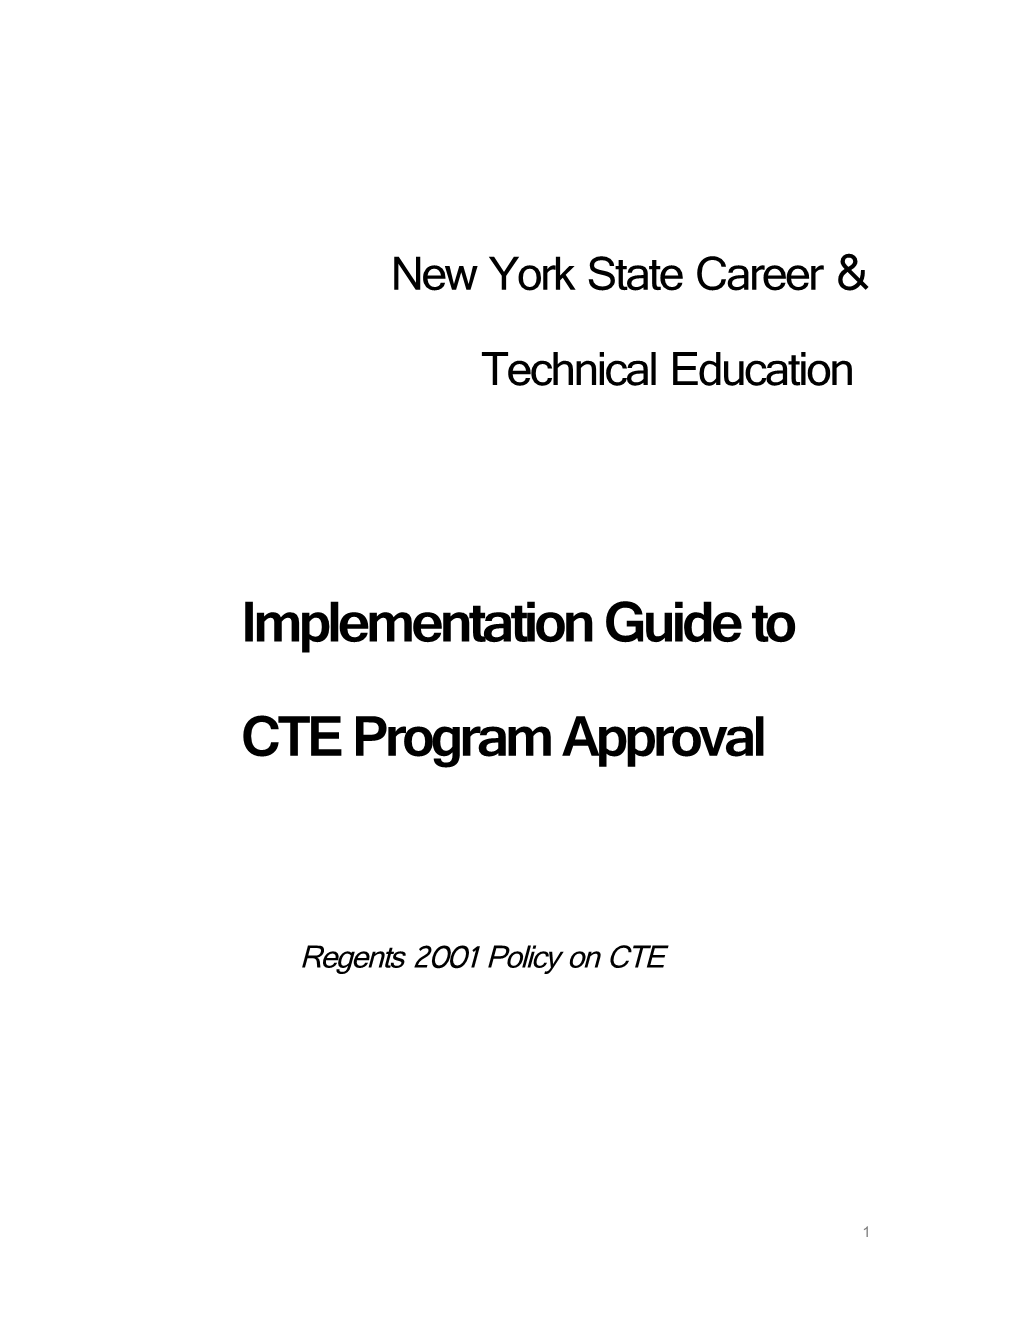 Implementation Guide To CTE Program Approval